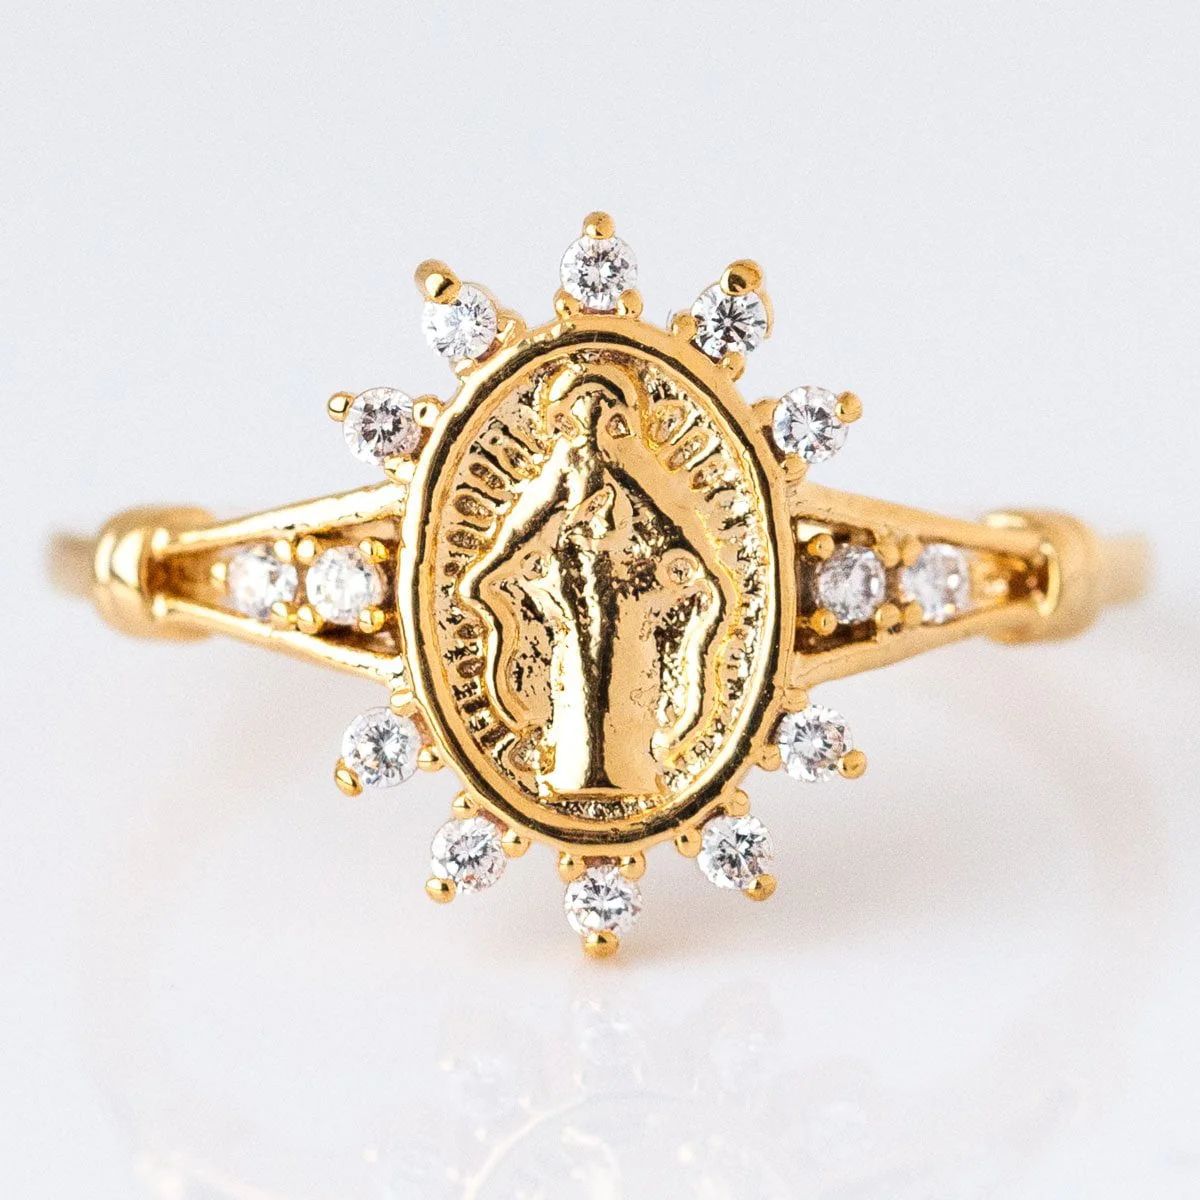 Morena Sacred Heart Ring | Local Eclectic